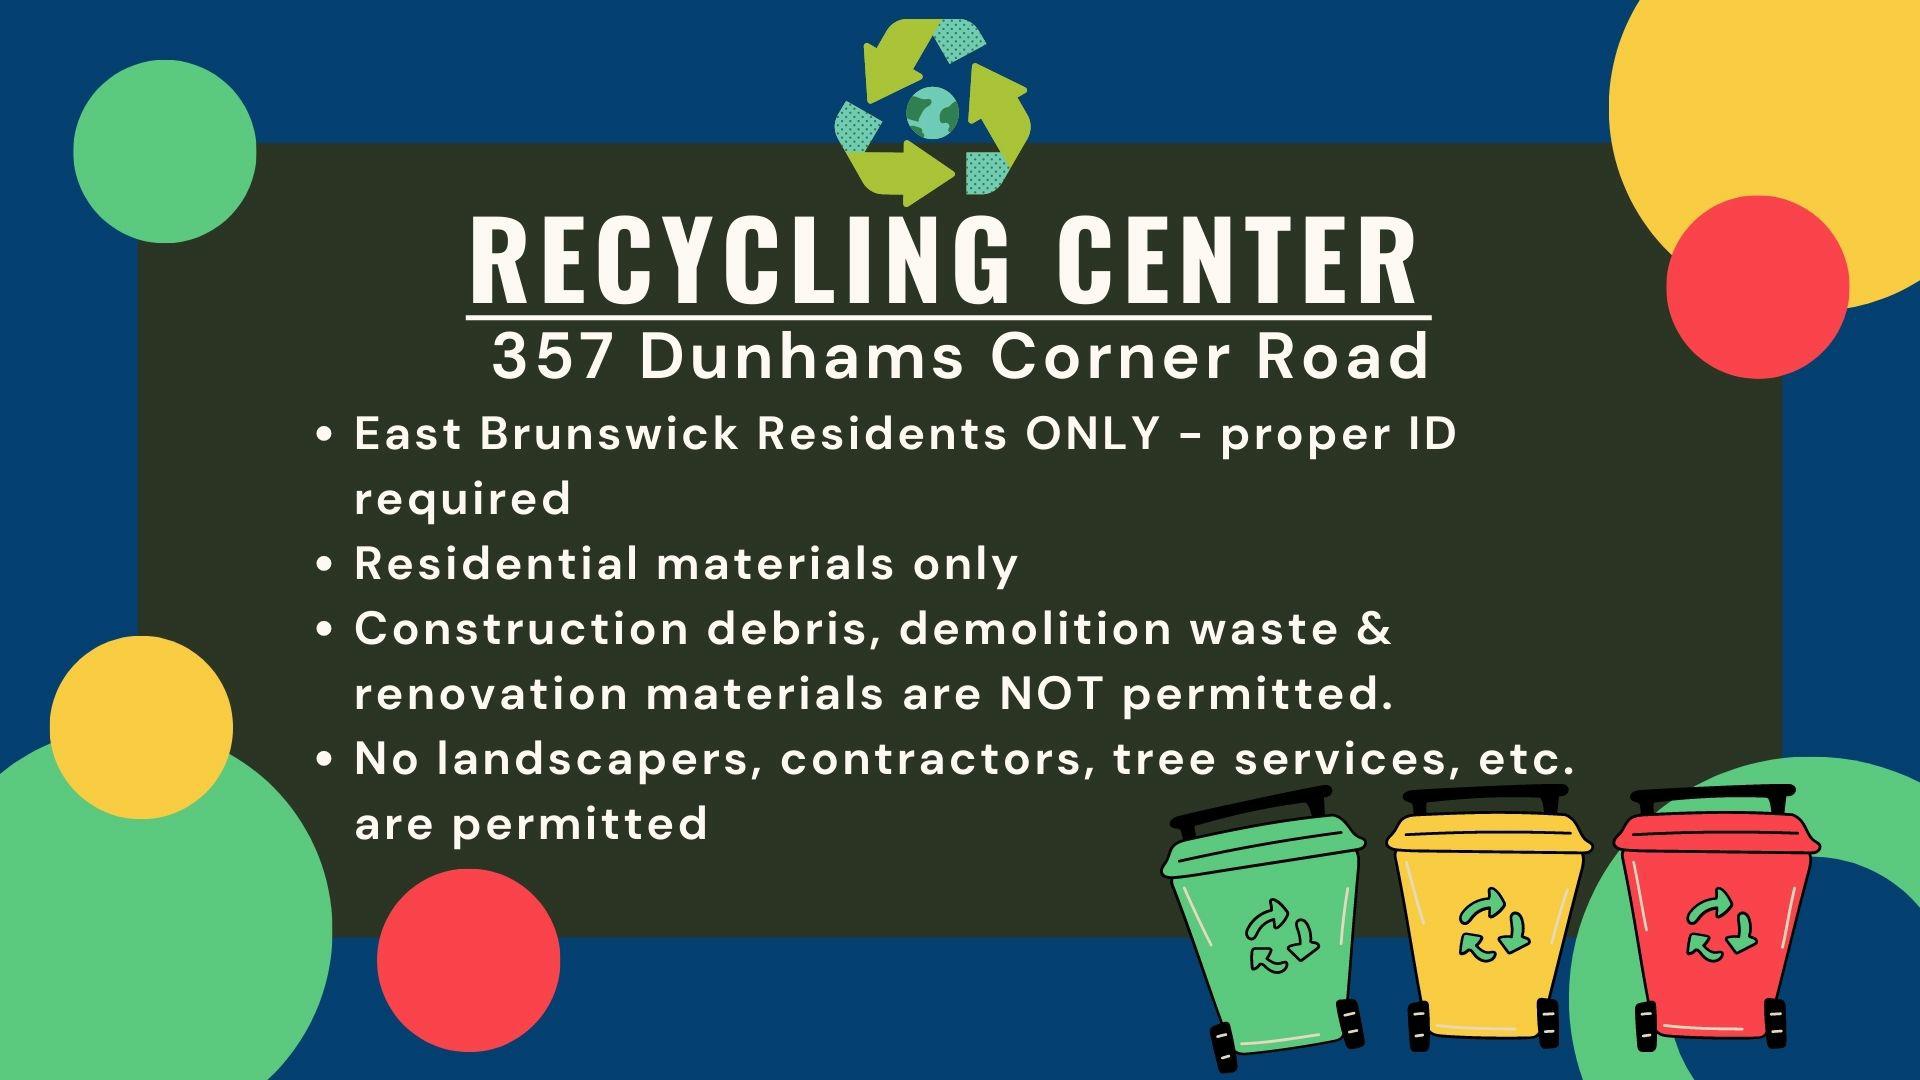 Recycling Center Information